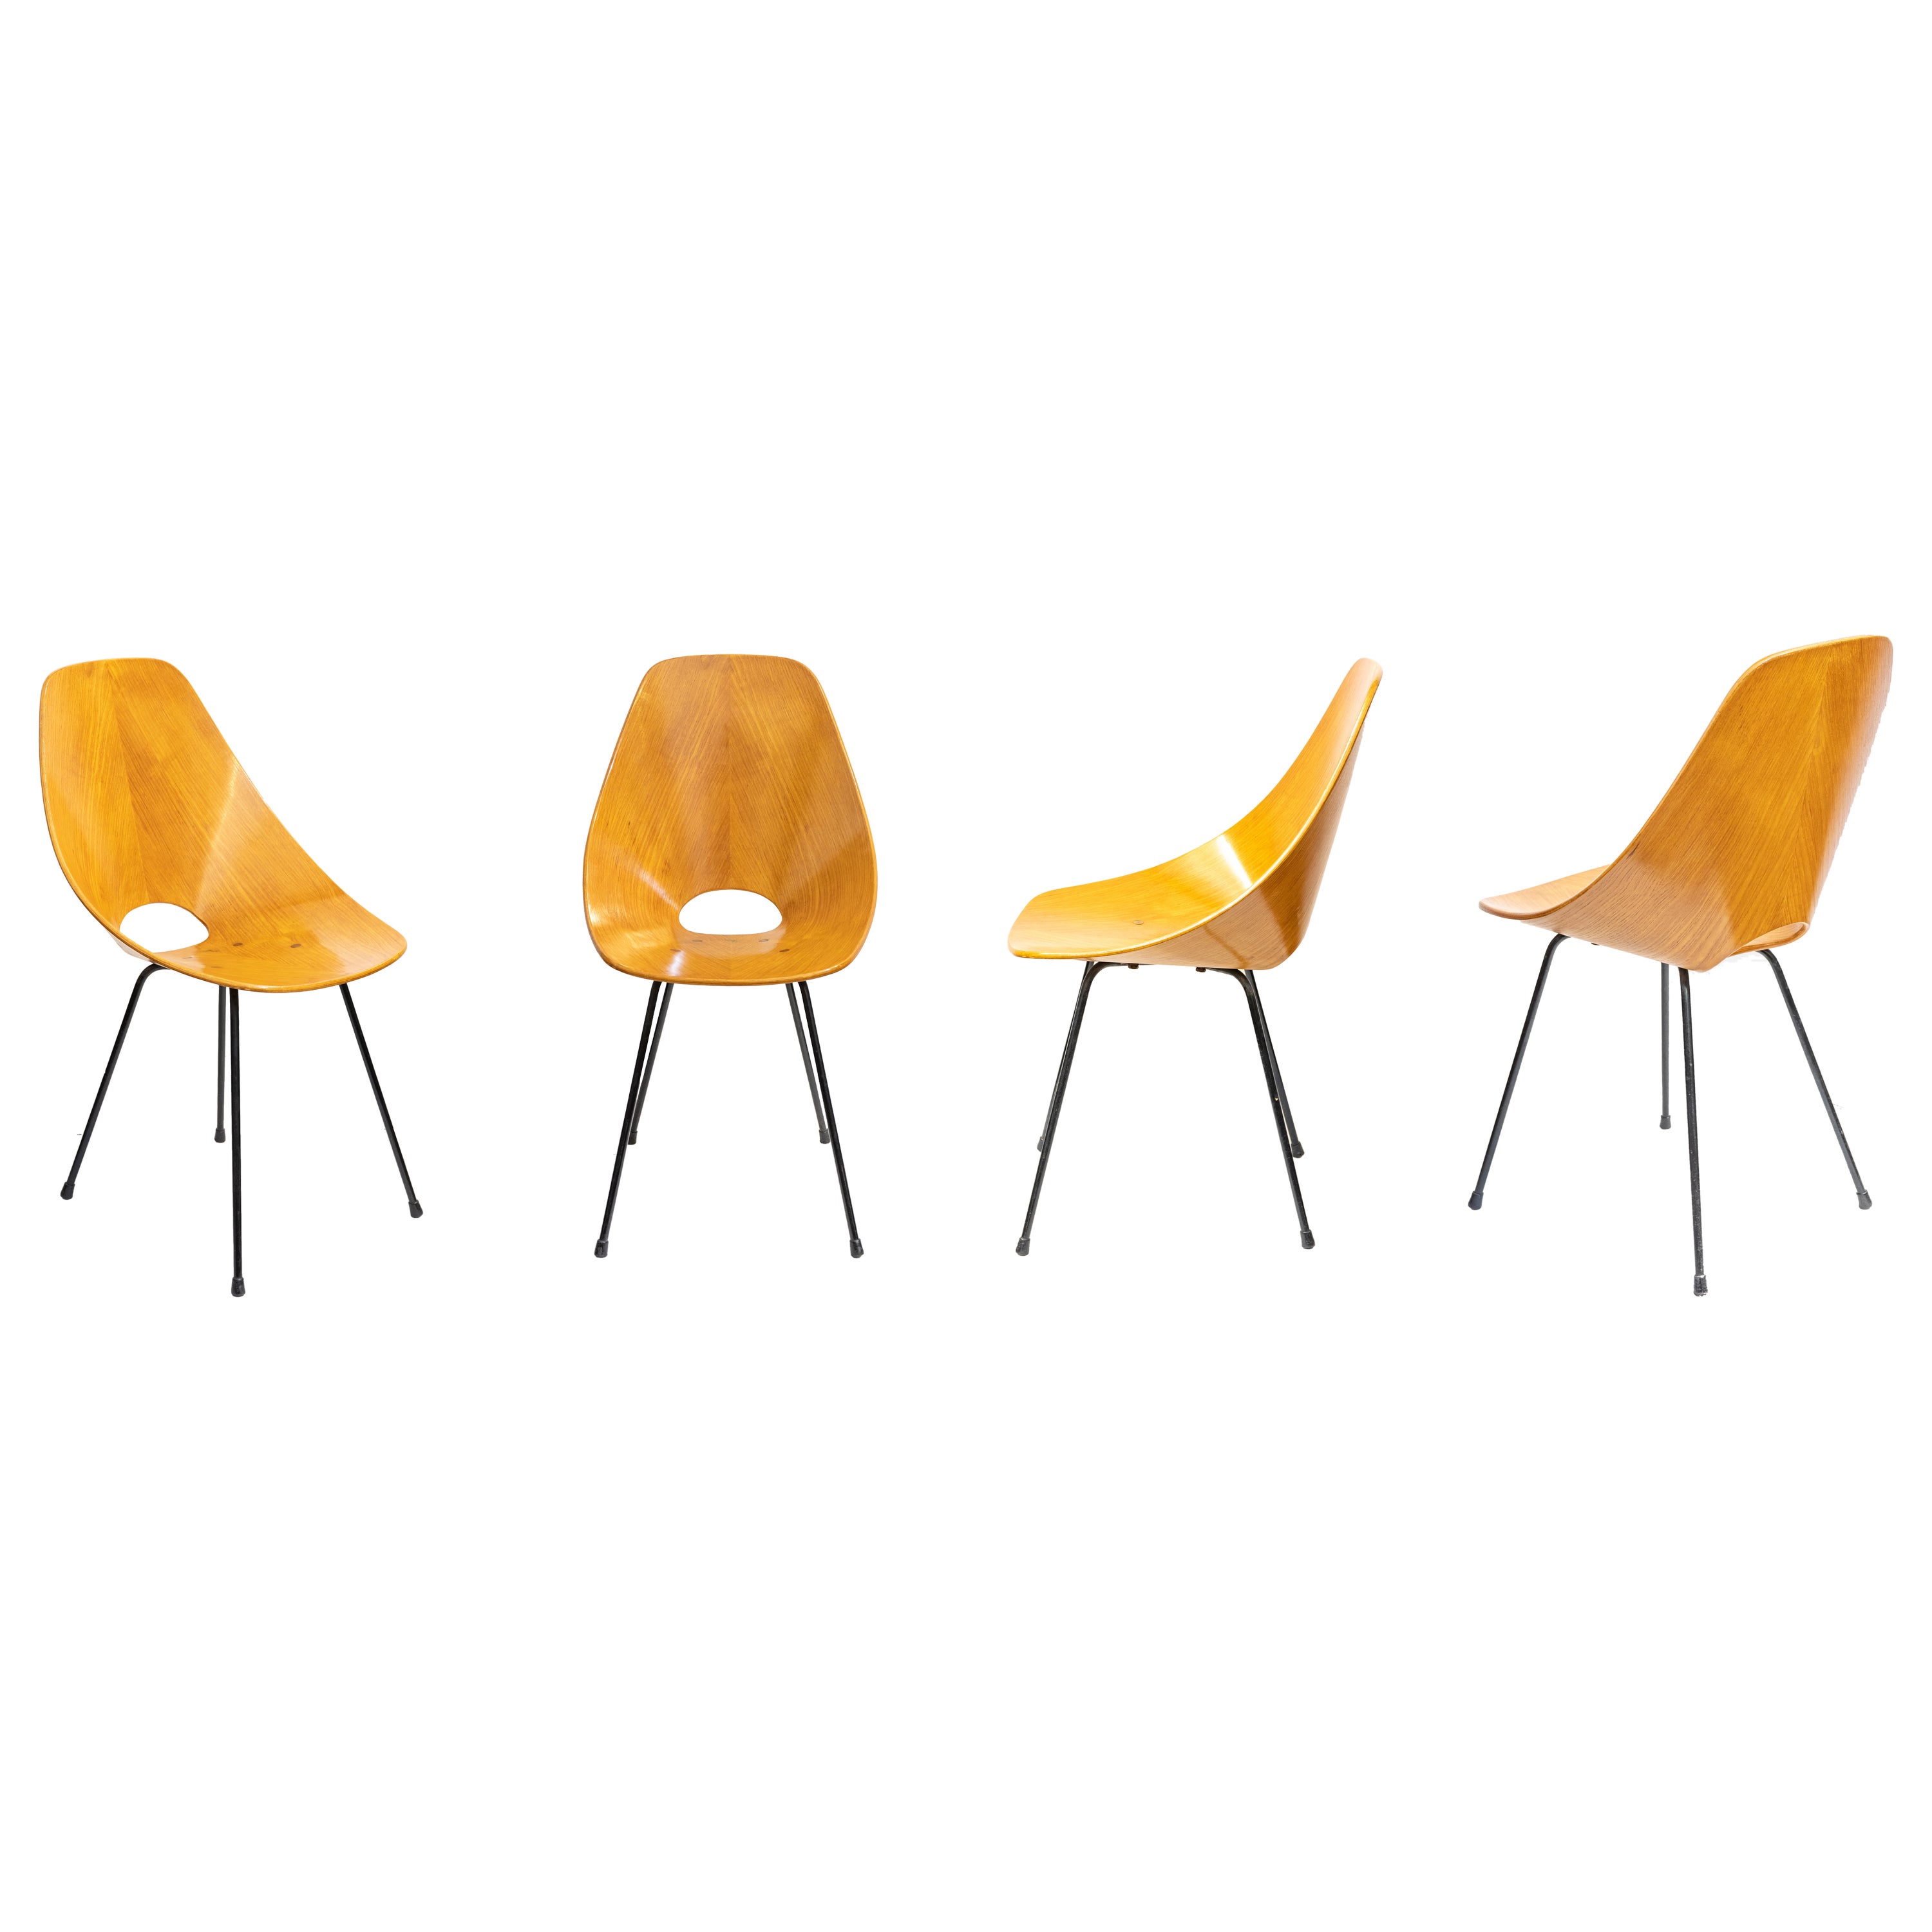 Set of Four "Medea" Chairs by Vittorio Nobili, Italy, 1955